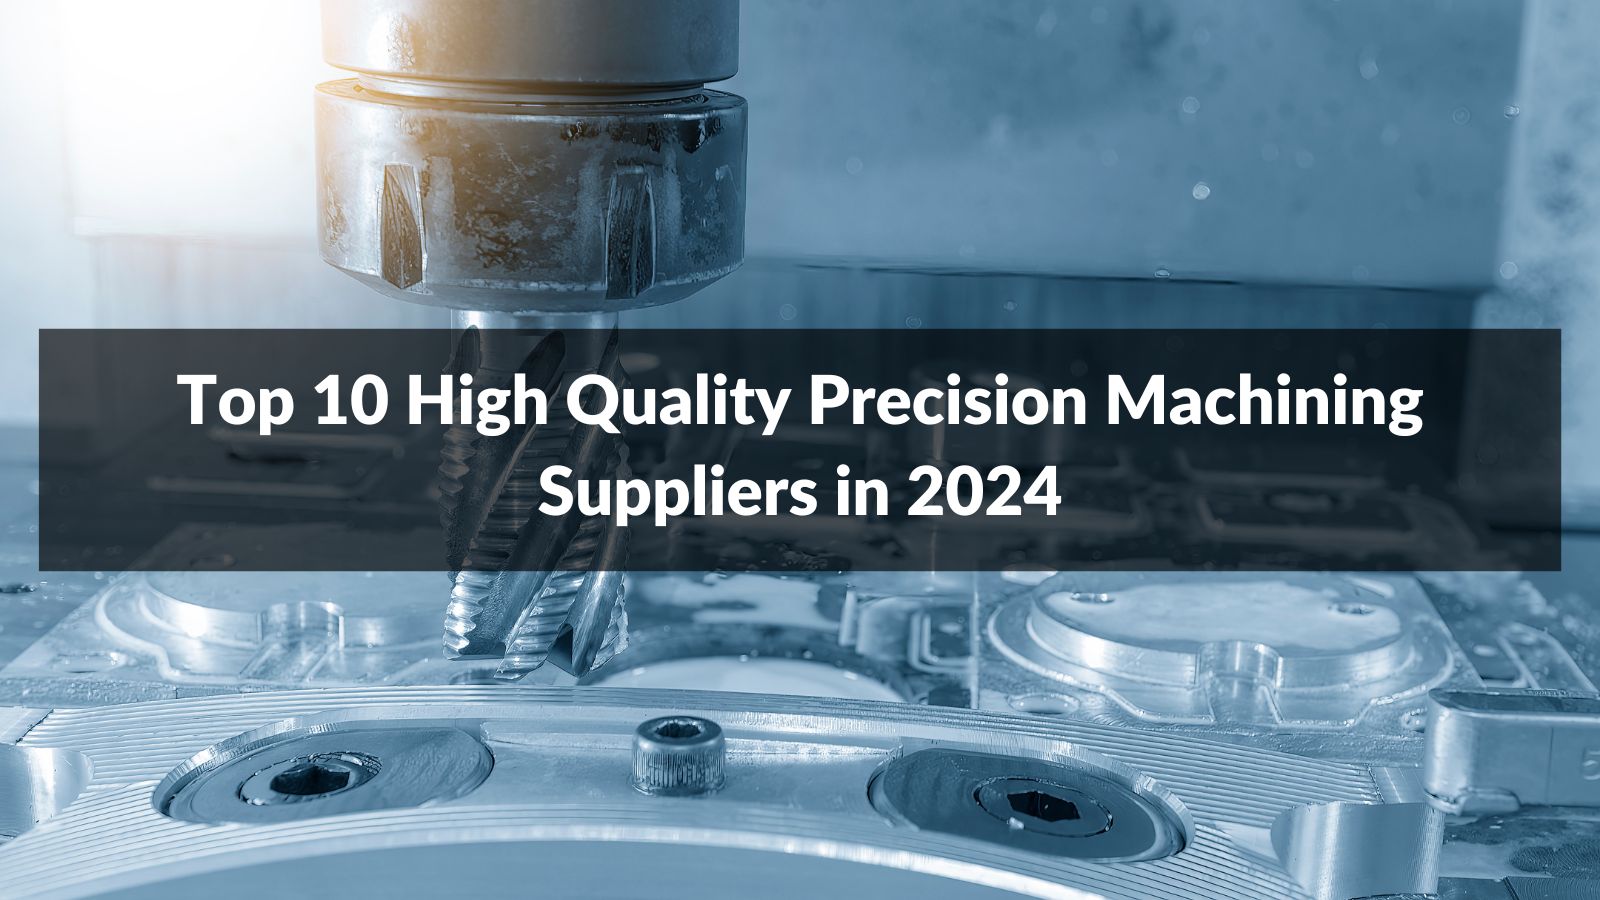 Top 10 High Quality Precision Machining Suppliers in 2024